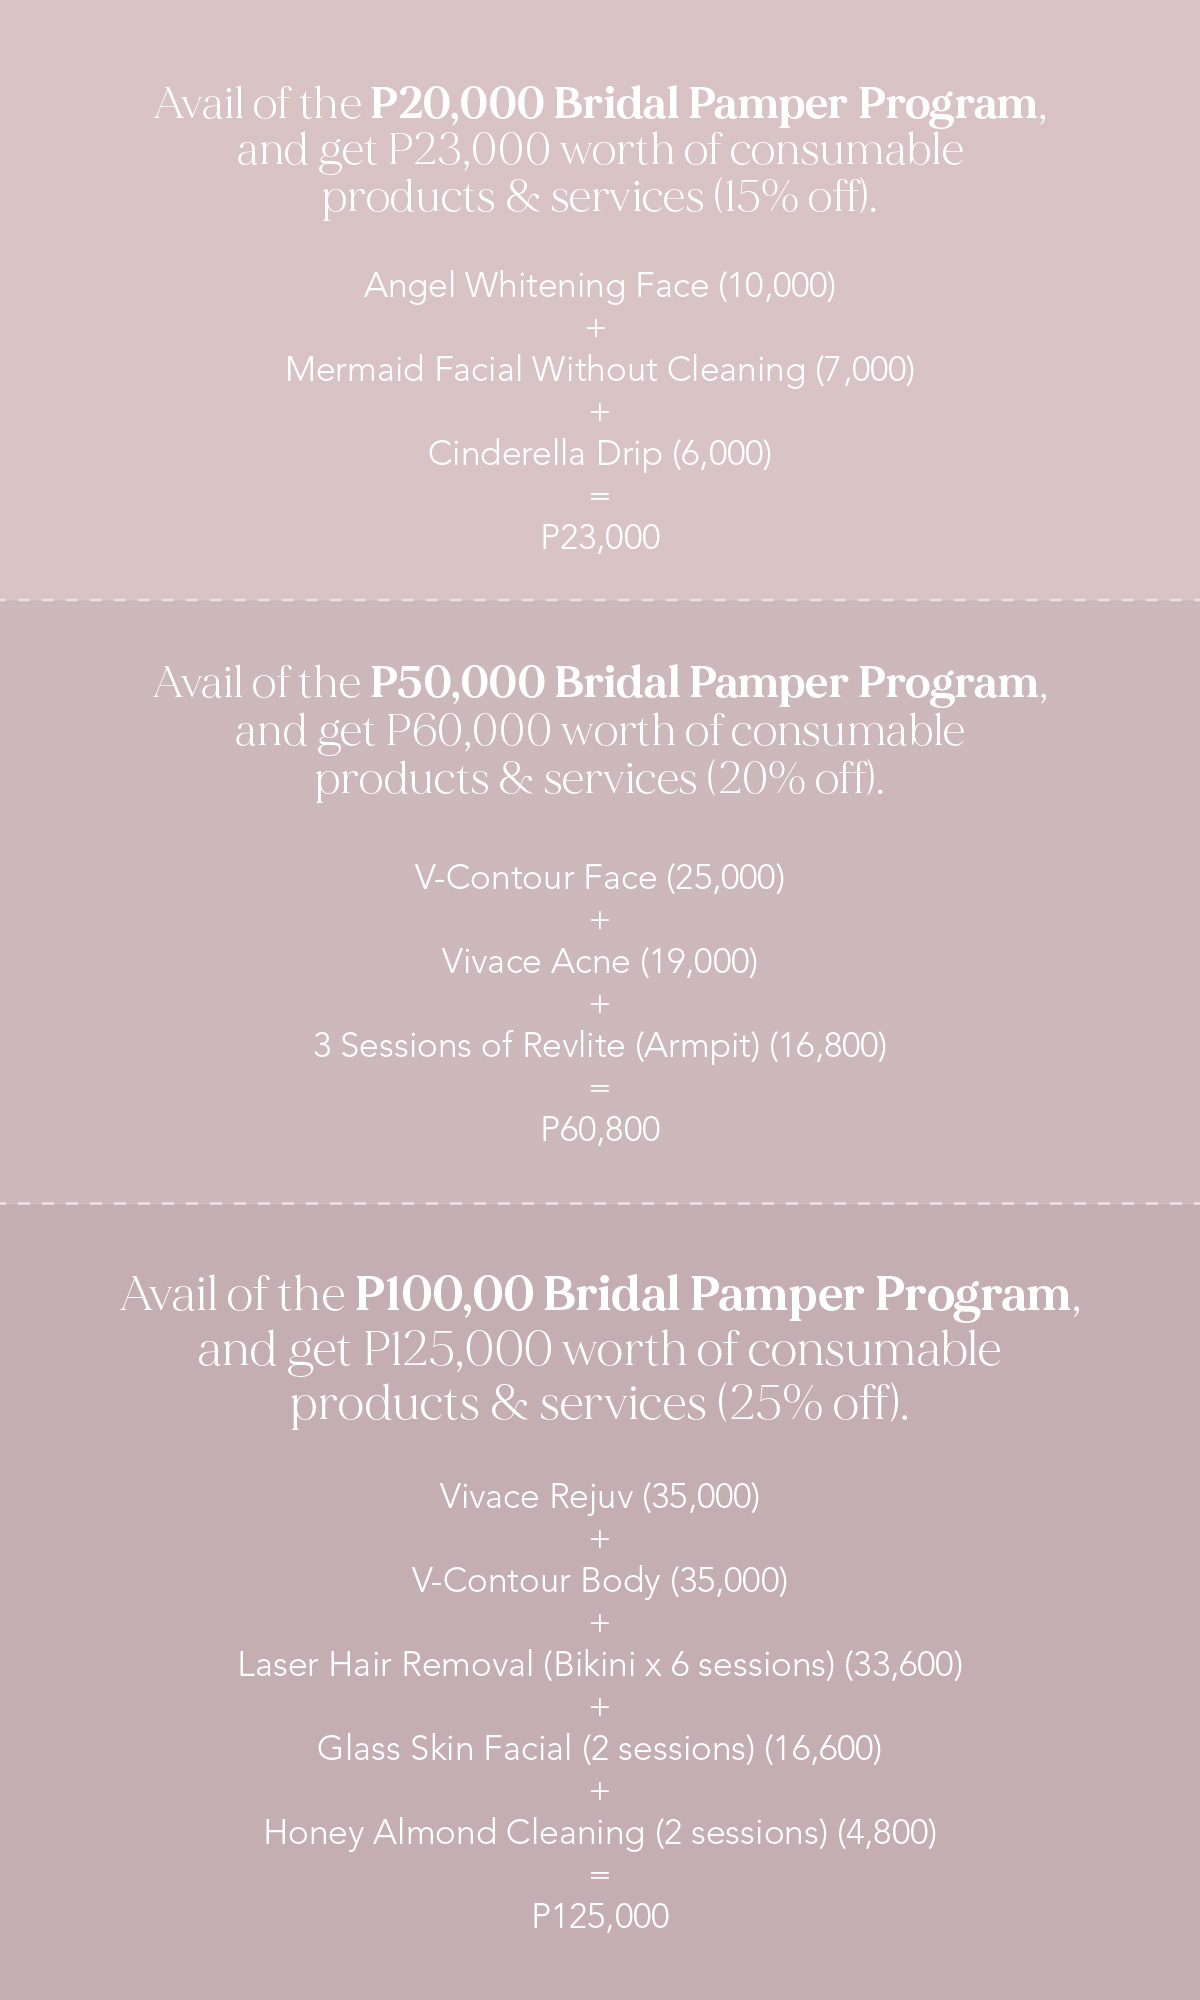 Avail of the P20,000 Bridal Pamper Program, and get P23,000 worth of consumable products & services (15% off). Angel Whitening Face (10,000) + Mermaid Facial Without Cleaning (7,000) + Cinderella Drip (6,000) = P23,000 Avail of the P50,000 Bridal Pamper Program, and get P60,000 worth of consumable products & services (20% off). V-Contour Face (25,000) + Vivace Acne (19,000) + 3 Sessions of Revlite (Armpit) (16,800) = P60,800 Avail of the P100,000 Bridal Pamper Program, and get P125,000 worth of consumable products & services (25% off). Vivace Rejuv (35,000) + V-Contour Body (35,000) + Laser Hair Removal (Bikini x 6 sessions) (33,600) + Glass Skin Facial (2 sessions) (16,600) + Honey Almond Cleaning (2 sessions) (4,800) = P125,000